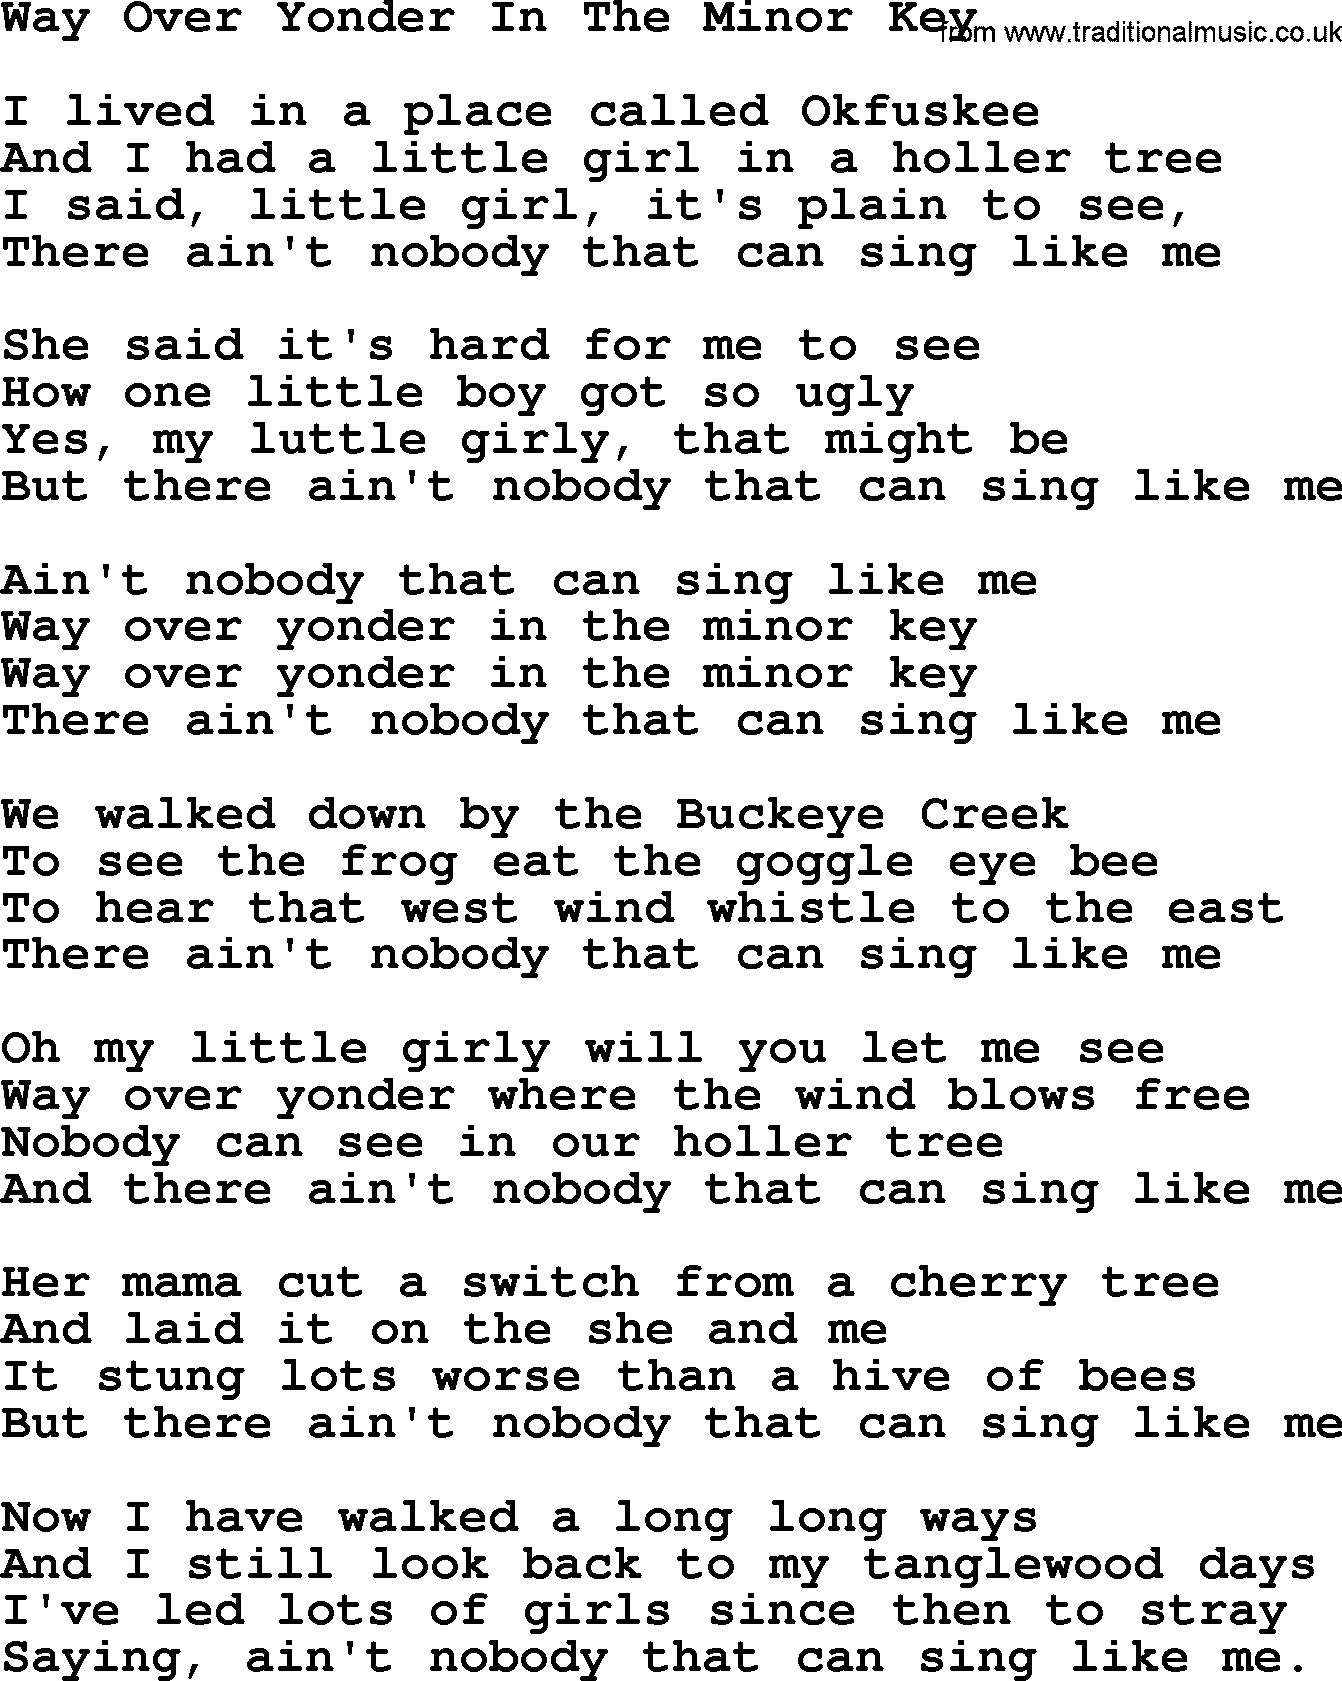 Woody Guthrie song Way Over Yonder In The Minor Key lyrics